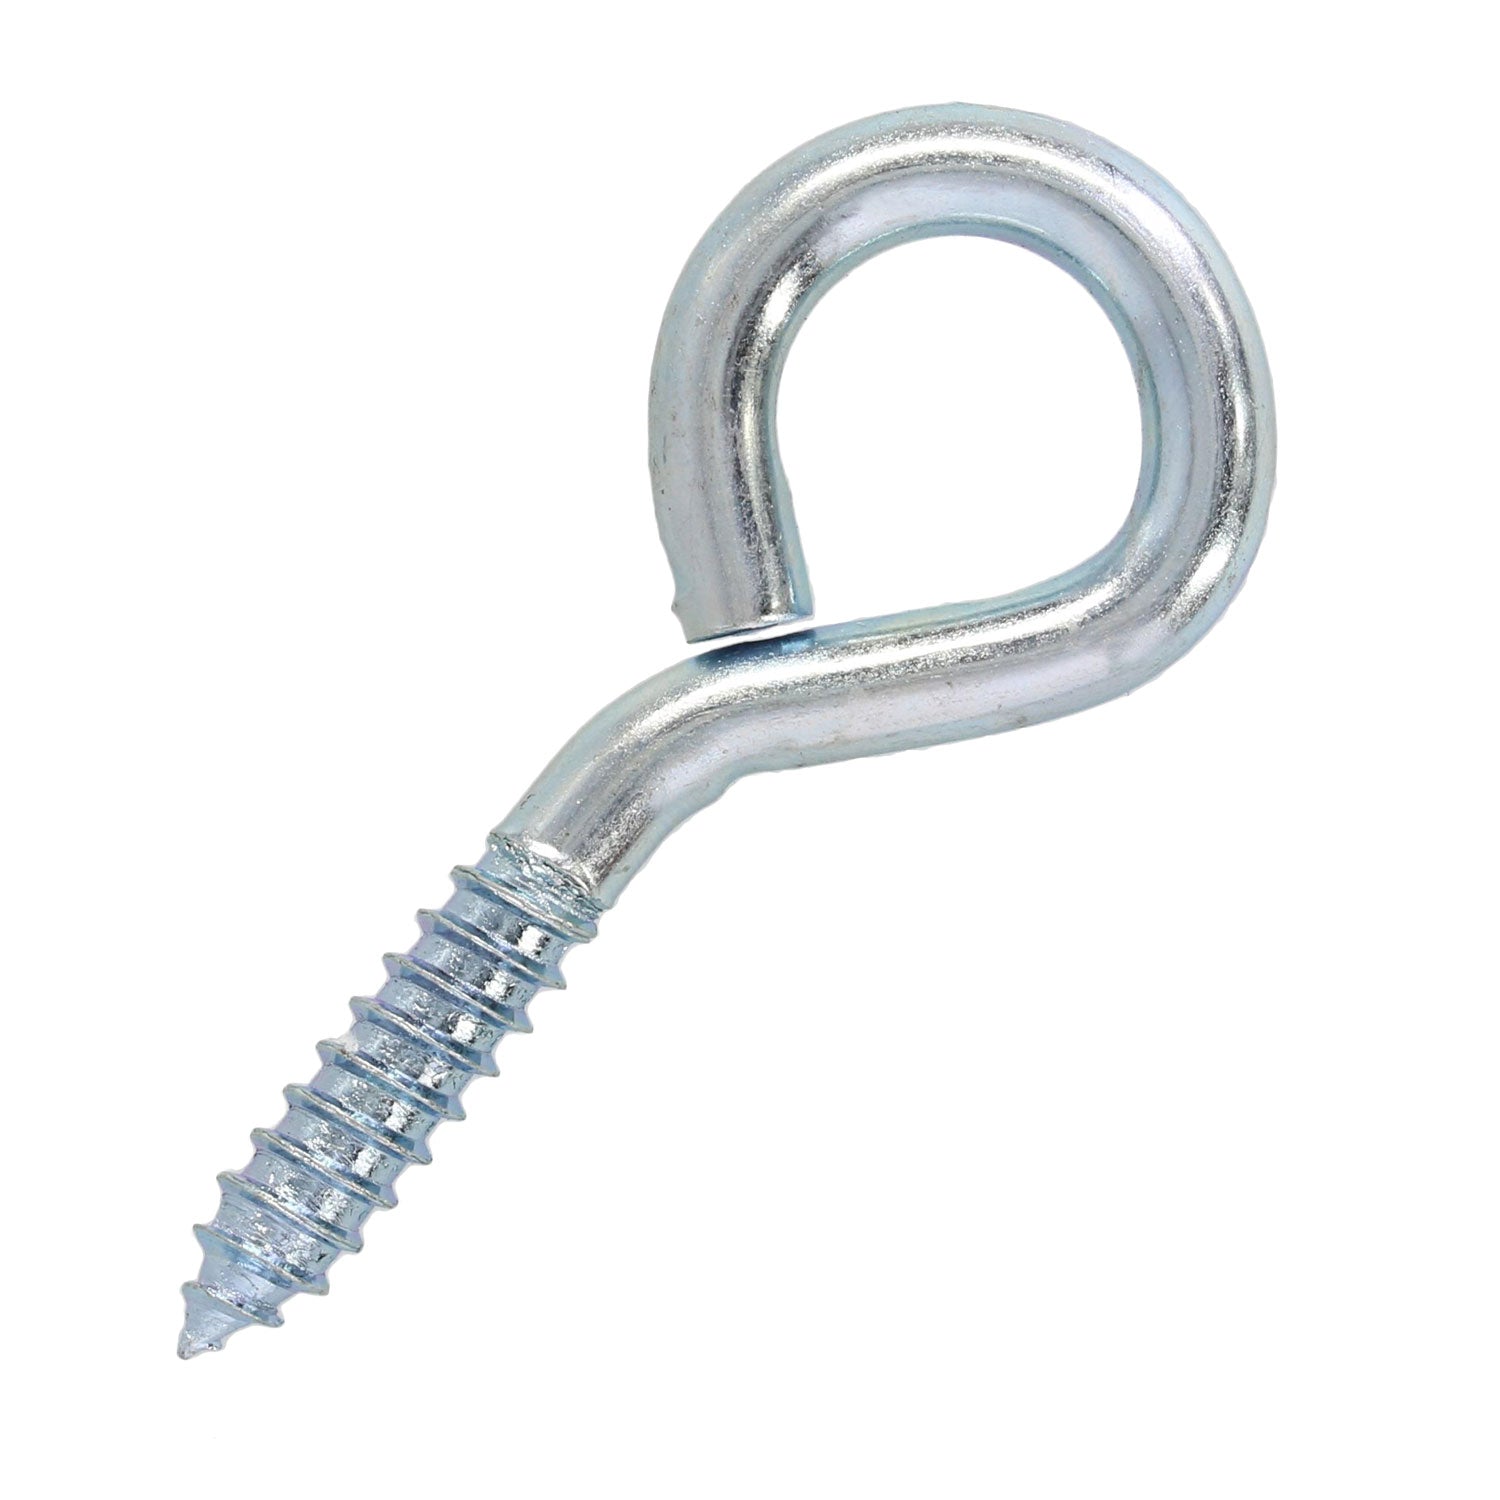 Zinc Plated Formed Lag Eye Bolts, Size: 3/4 x 3-1/8 92661105